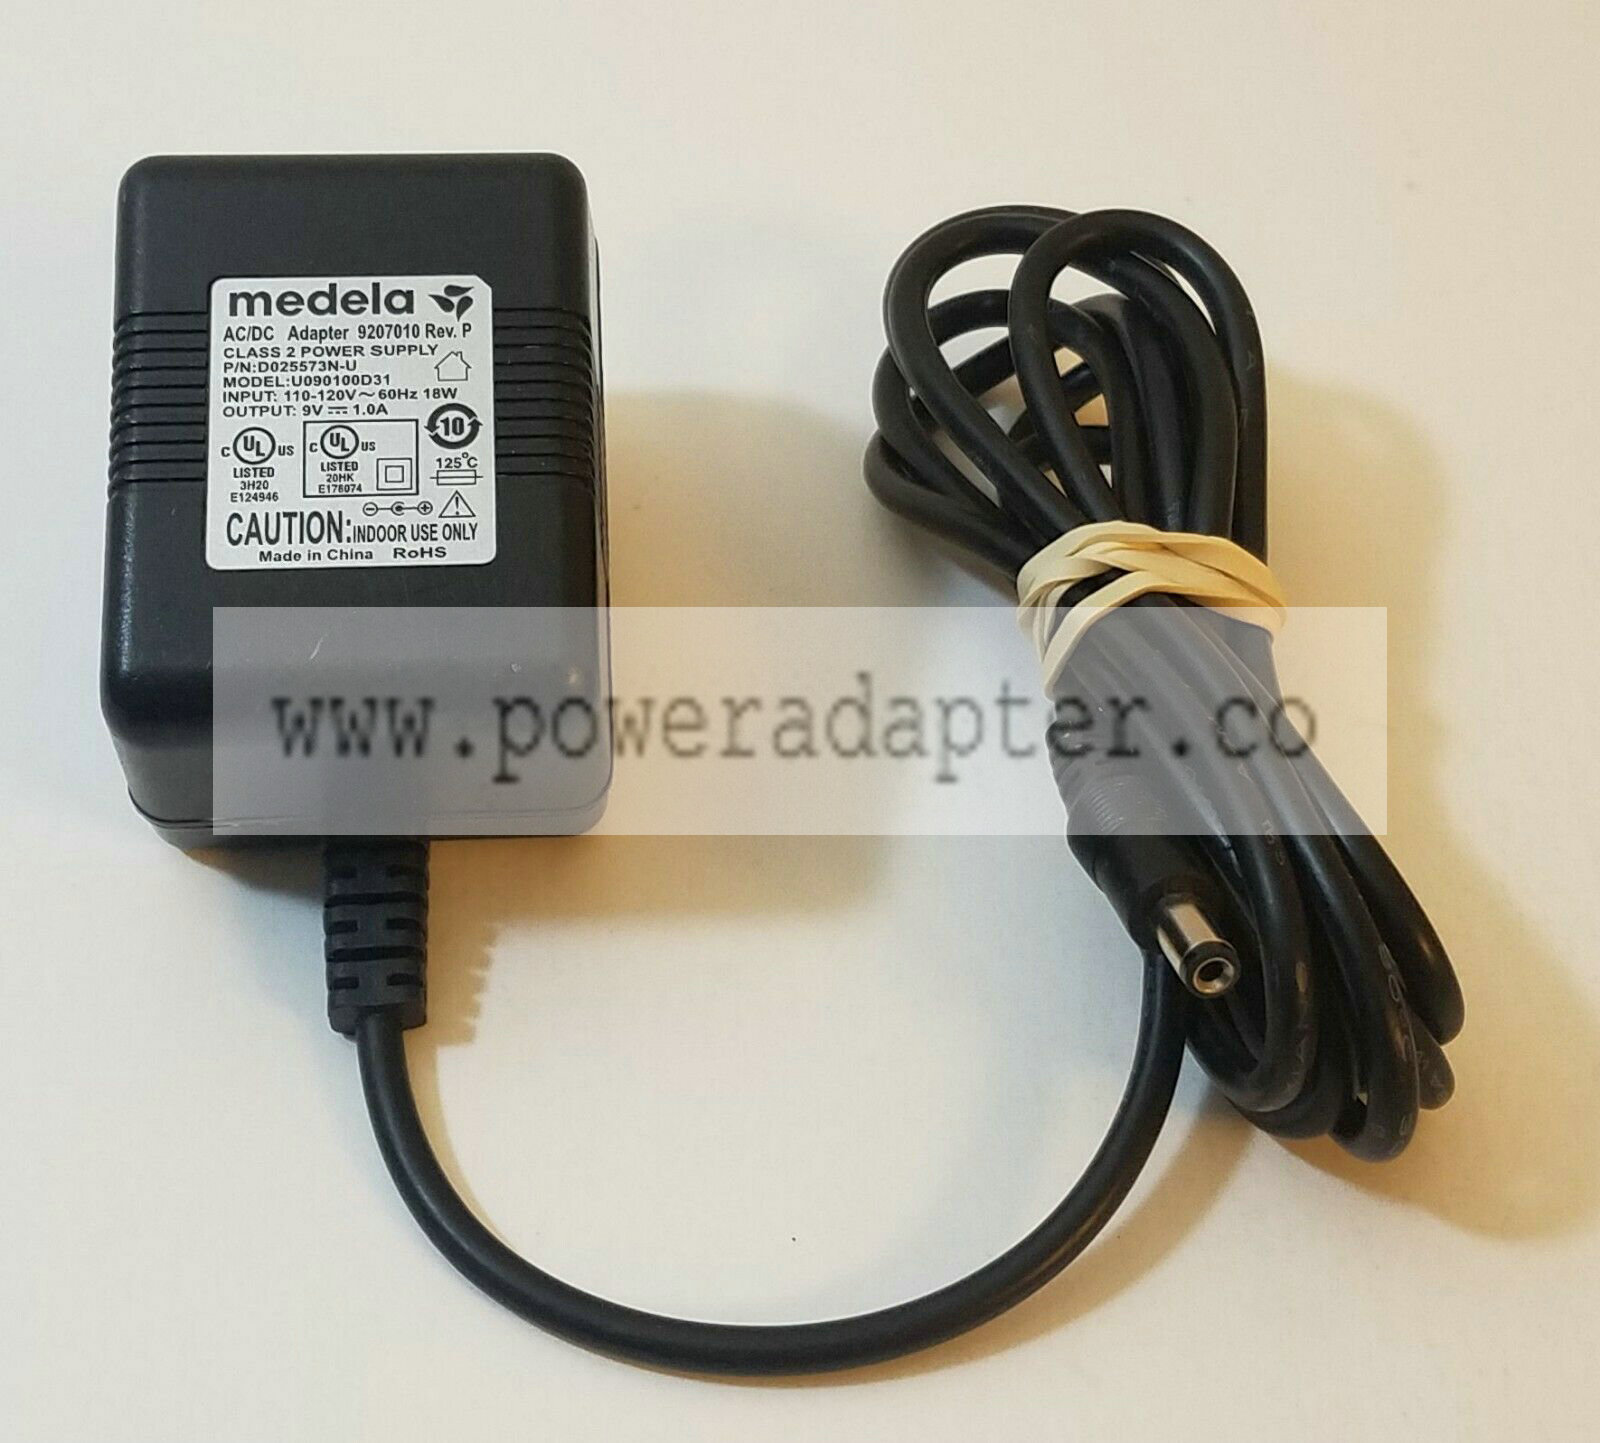 Genuine Medela U090100D31 AC Adapter Power Supply 920.7010 9V 1.0A Breast Pump Type: AC/DC Adapter Output Voltage: 9 - Click Image to Close